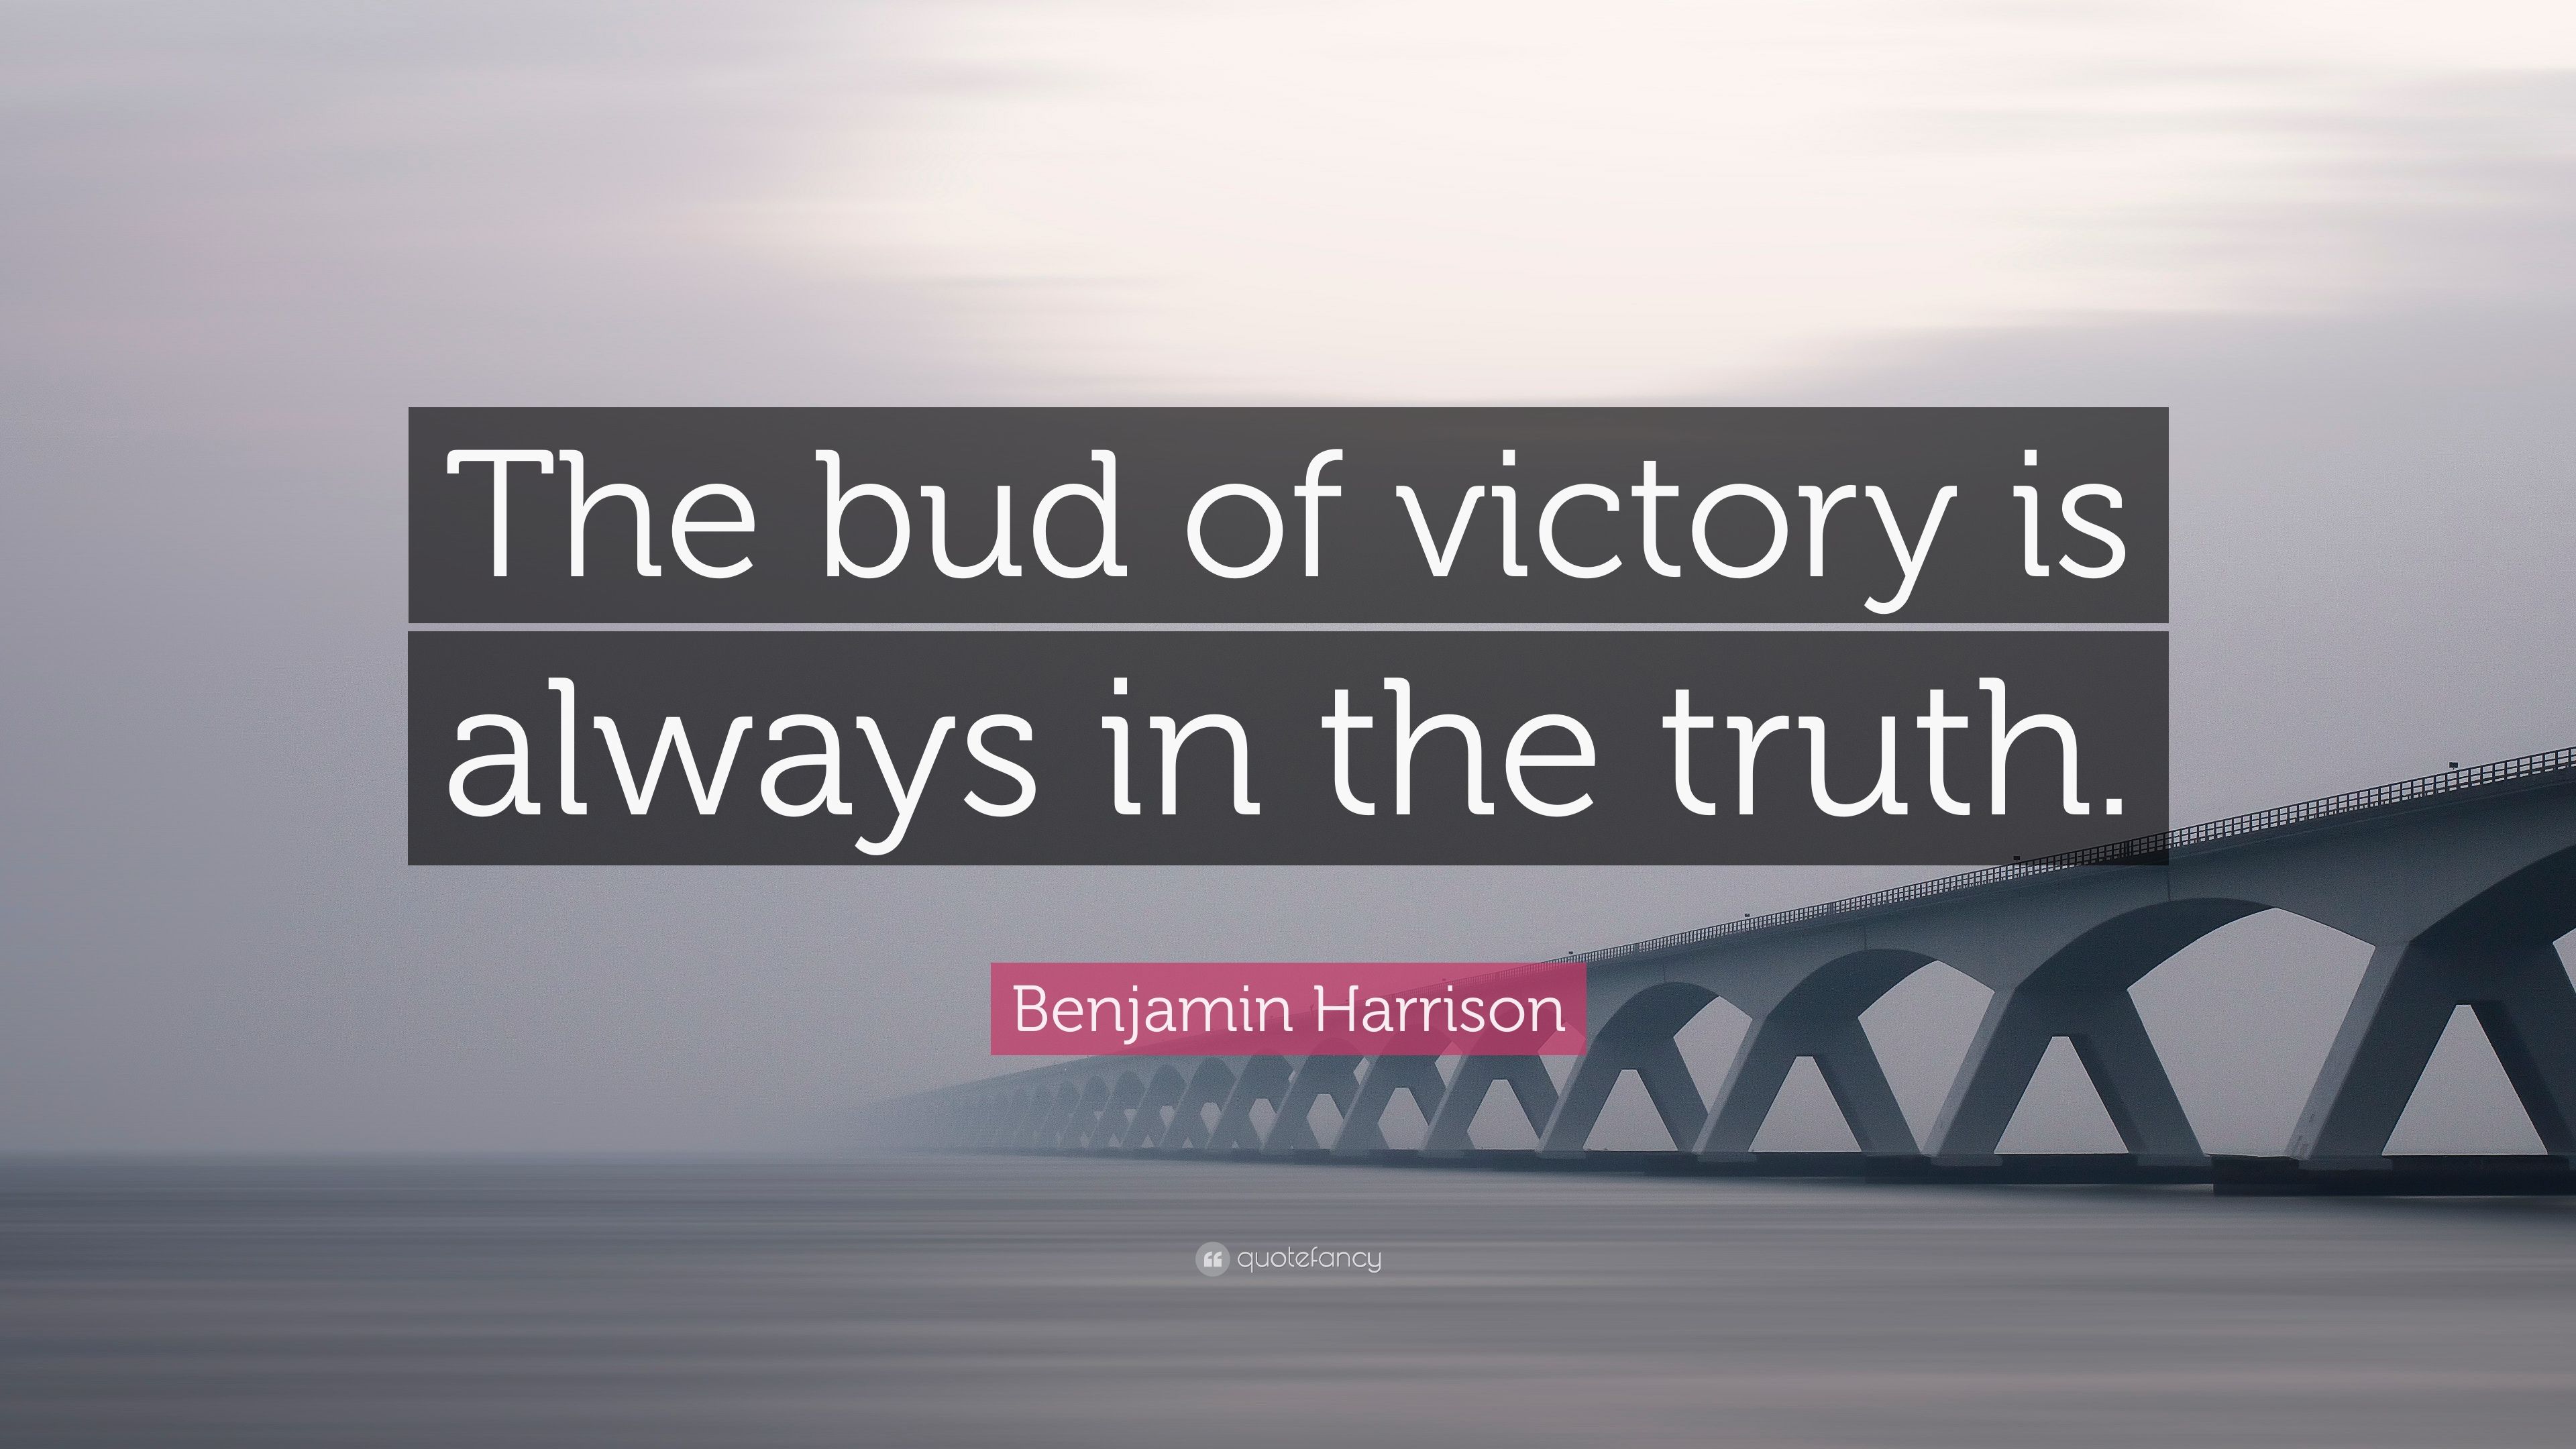 Benjamin Harrison Quote: “The bud of victory is always in